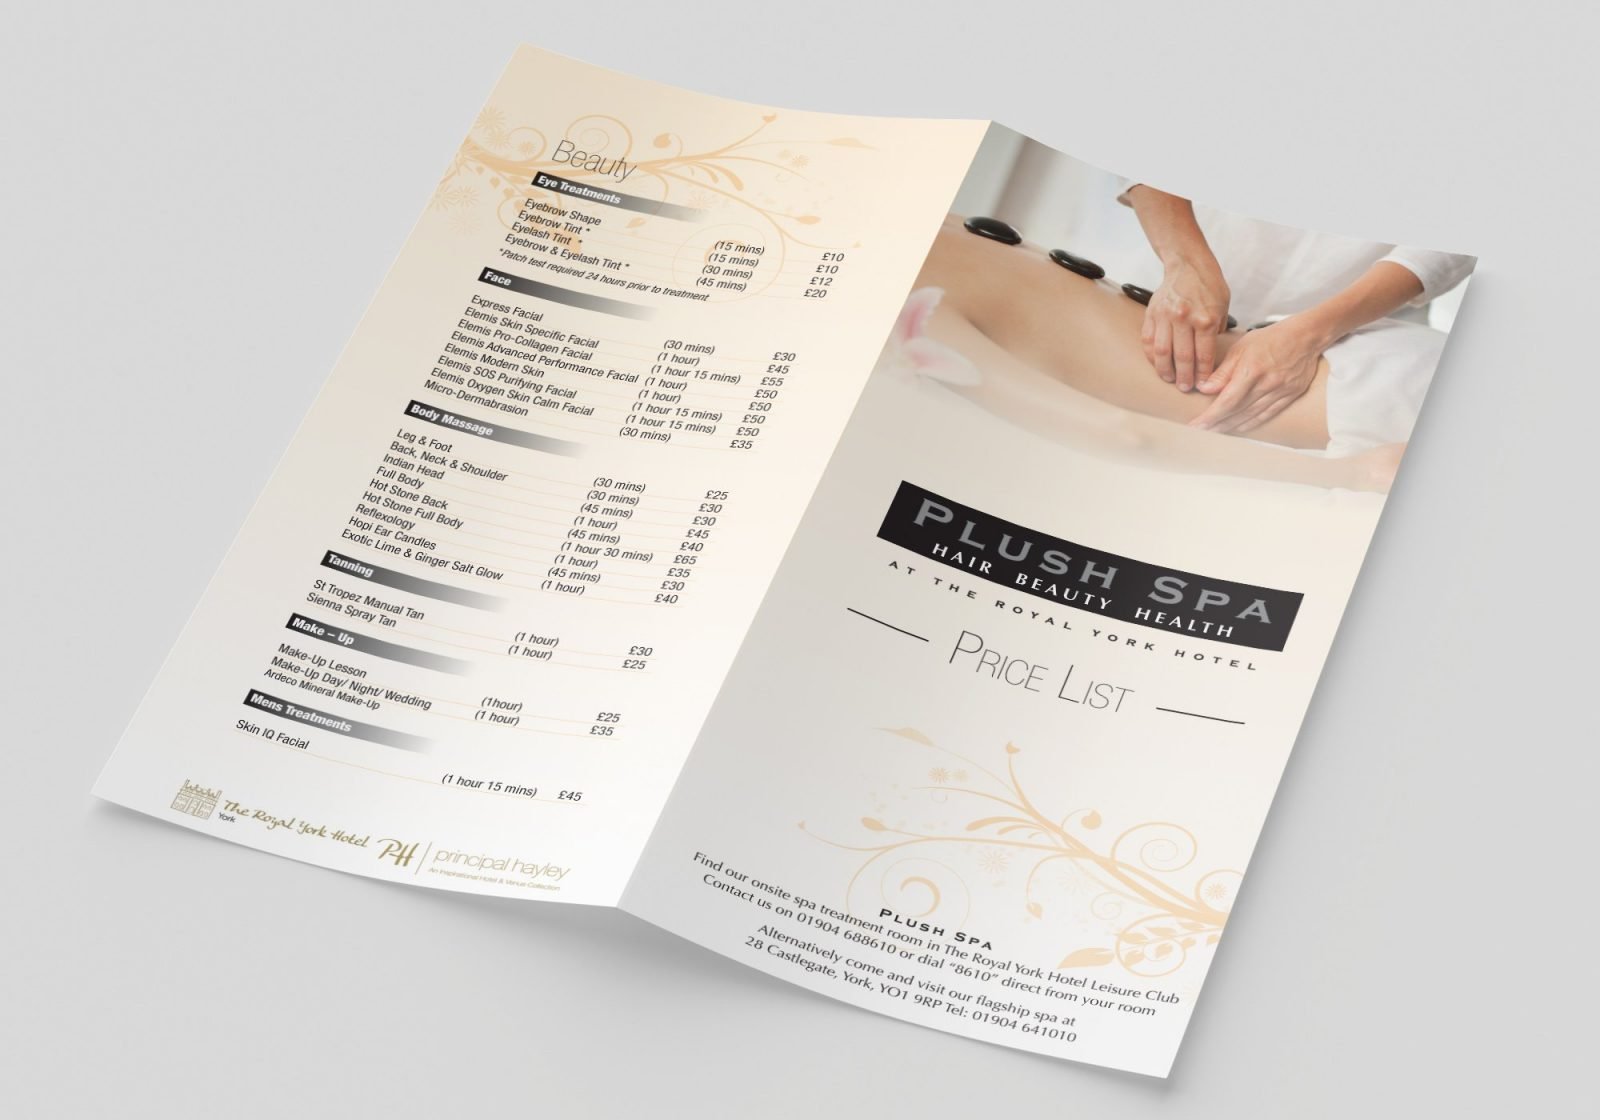 A Folded A4 Leaflet for Push Spa Hair dressers showing the front and back pages